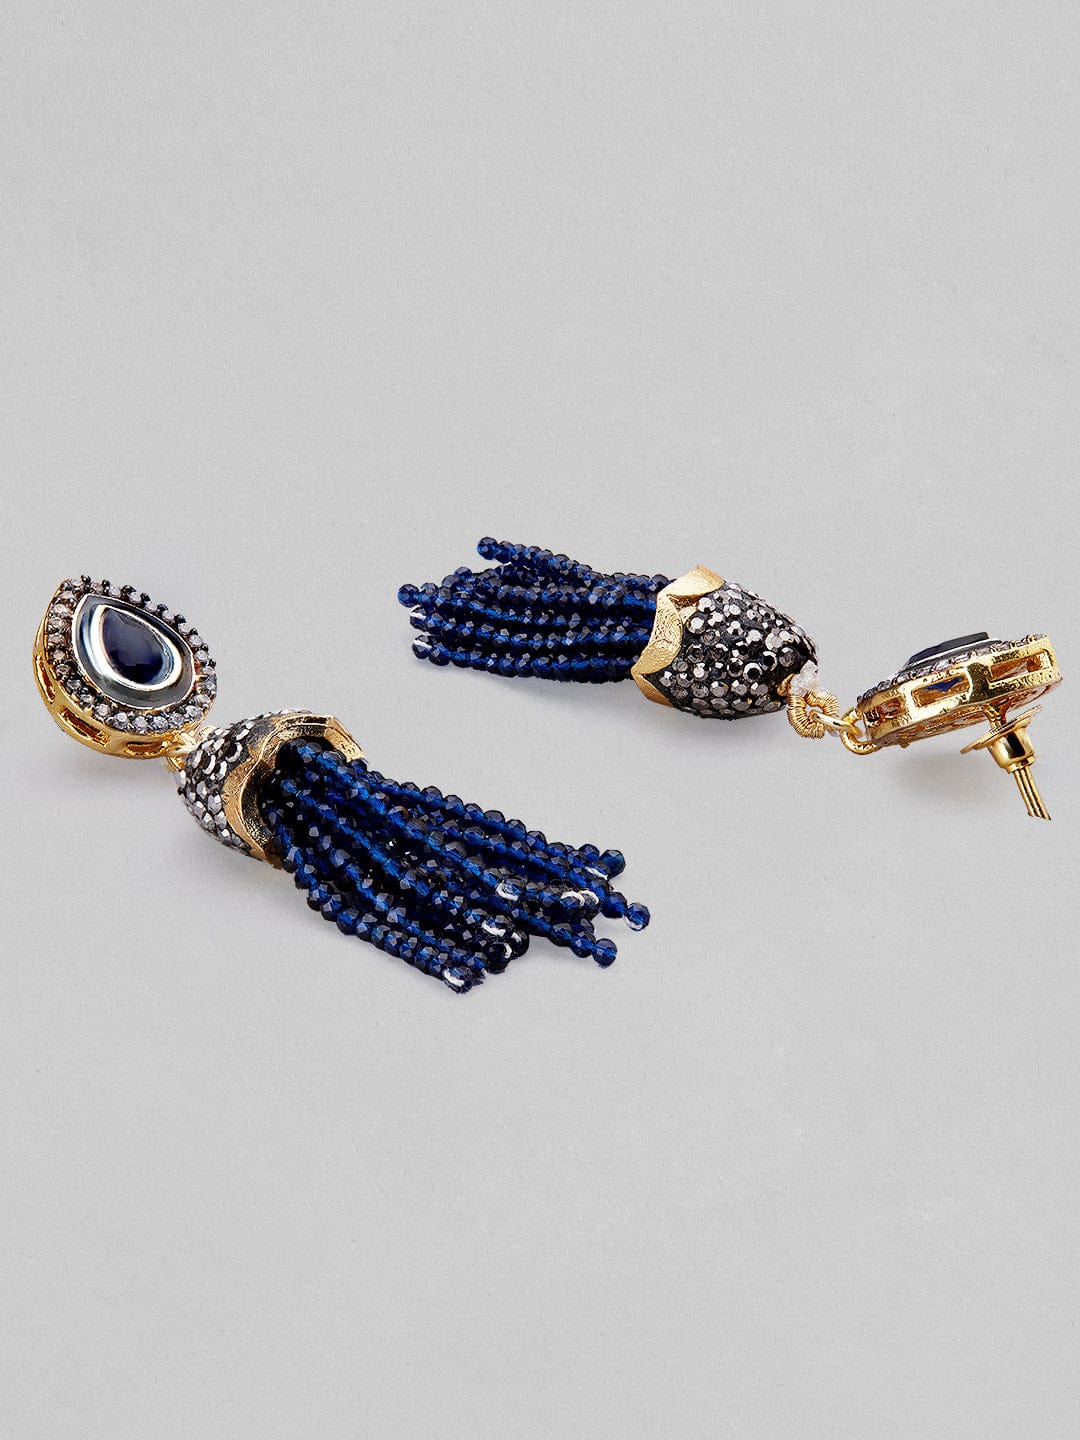 Rubans Necklace Set With Royal Blue beads And Elegant Design